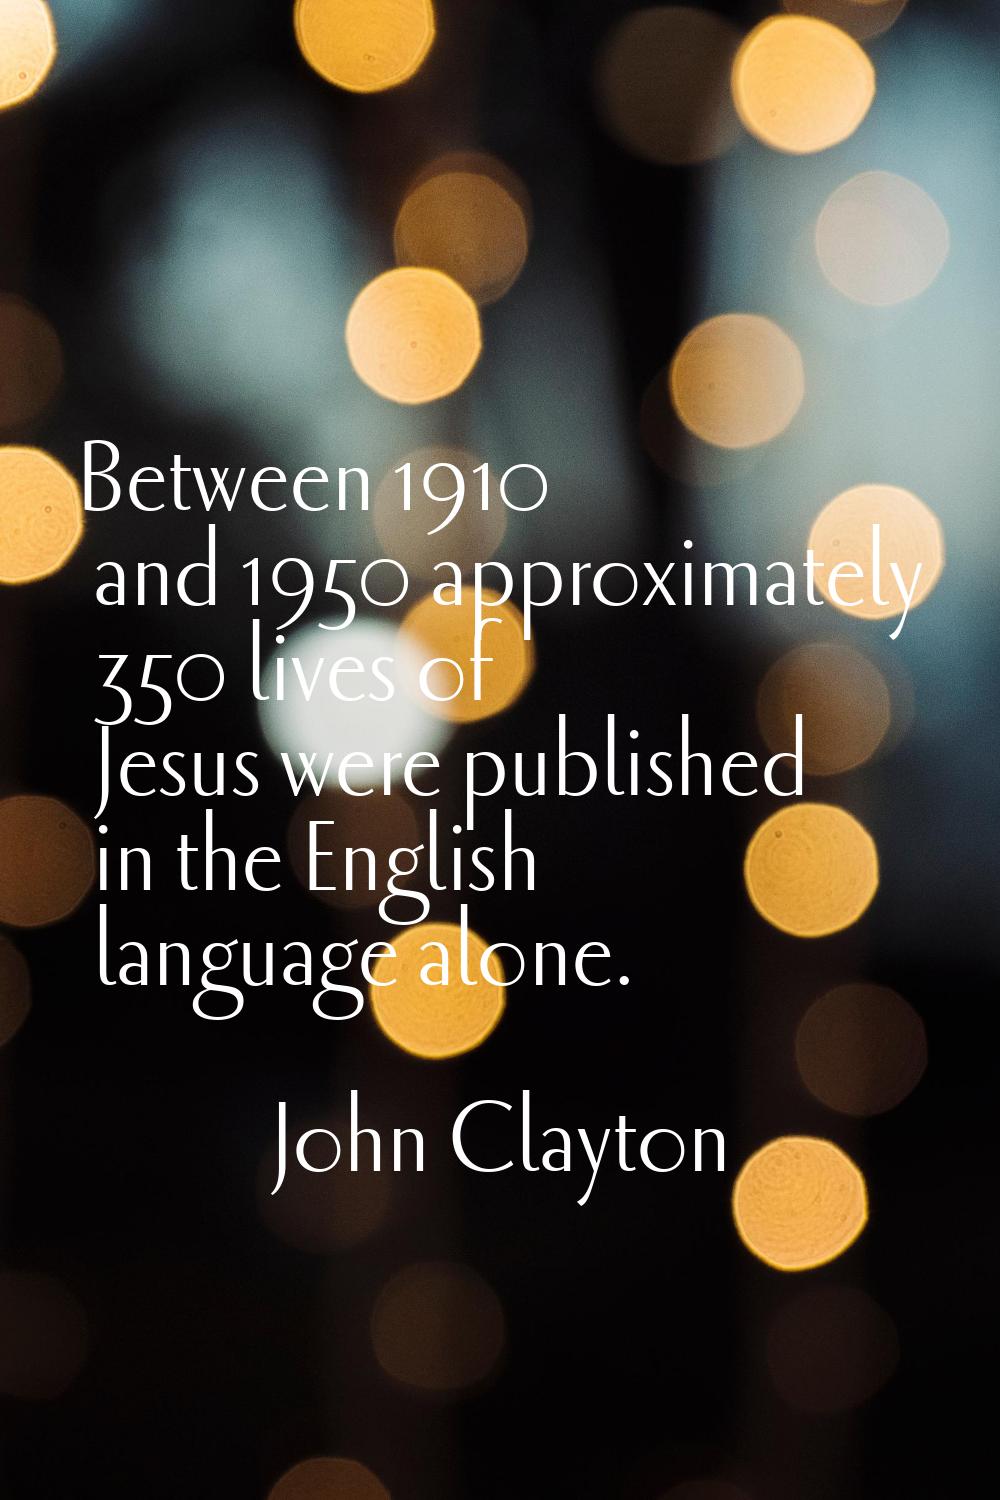 Between 1910 and 1950 approximately 350 lives of Jesus were published in the English language alone